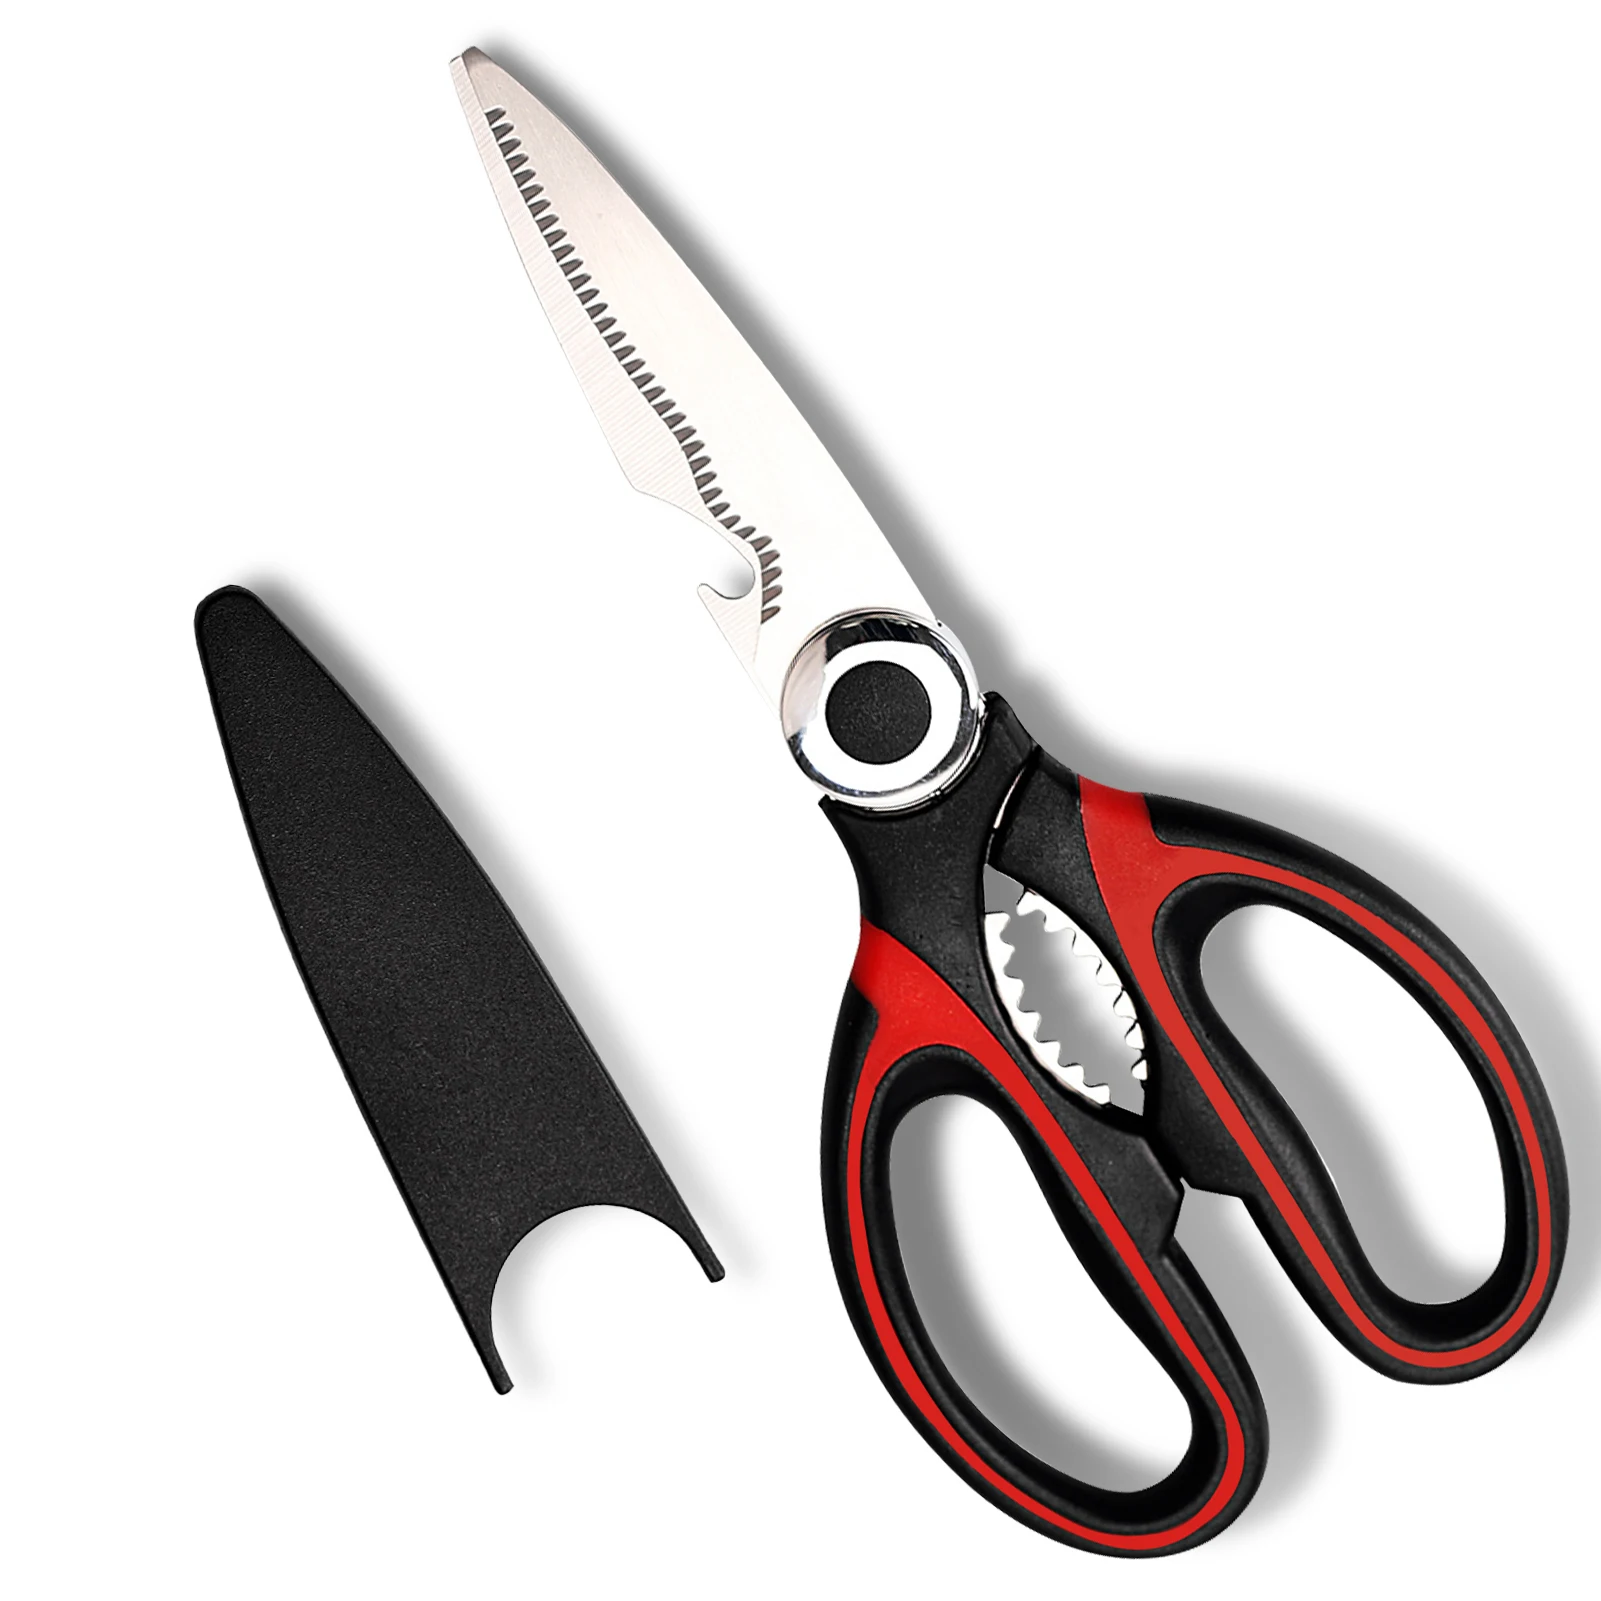 Kitchen Shears Kitchen Shears Seafood Scissors Stainless Steel Multi-function Scissors For Food Chicken Poultry Fish Pizza Herbs